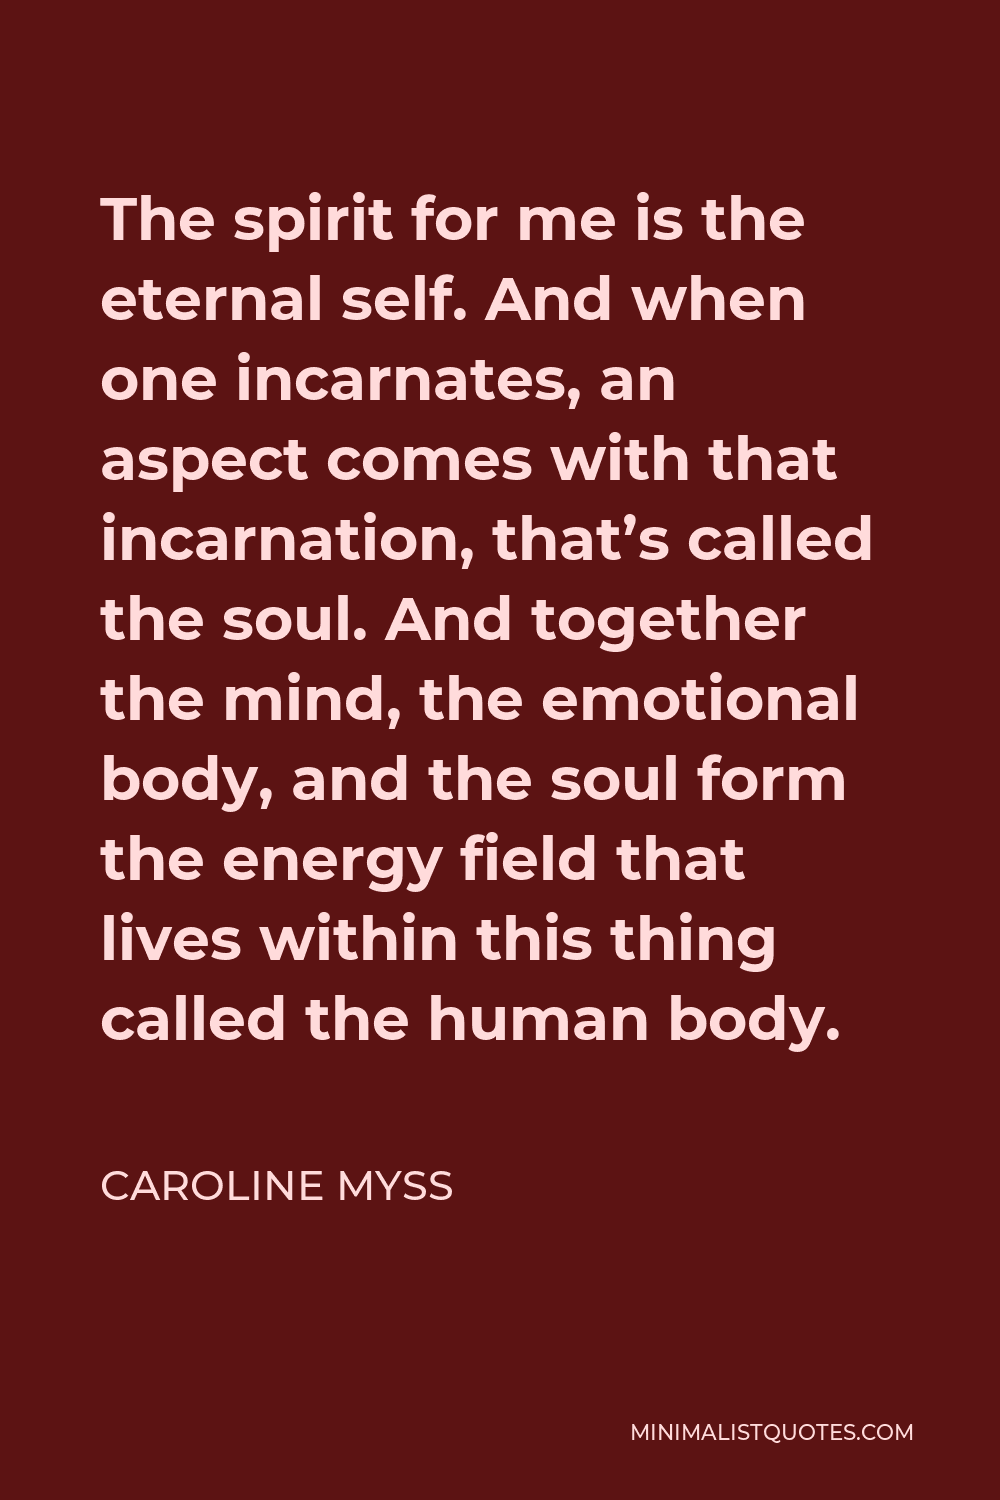 Caroline Myss Quote - The spirit for me is the eternal self. And when one incarnates, an aspect comes with that incarnation, that’s called the soul. And together the mind, the emotional body, and the soul form the energy field that lives within this thing called the human body.